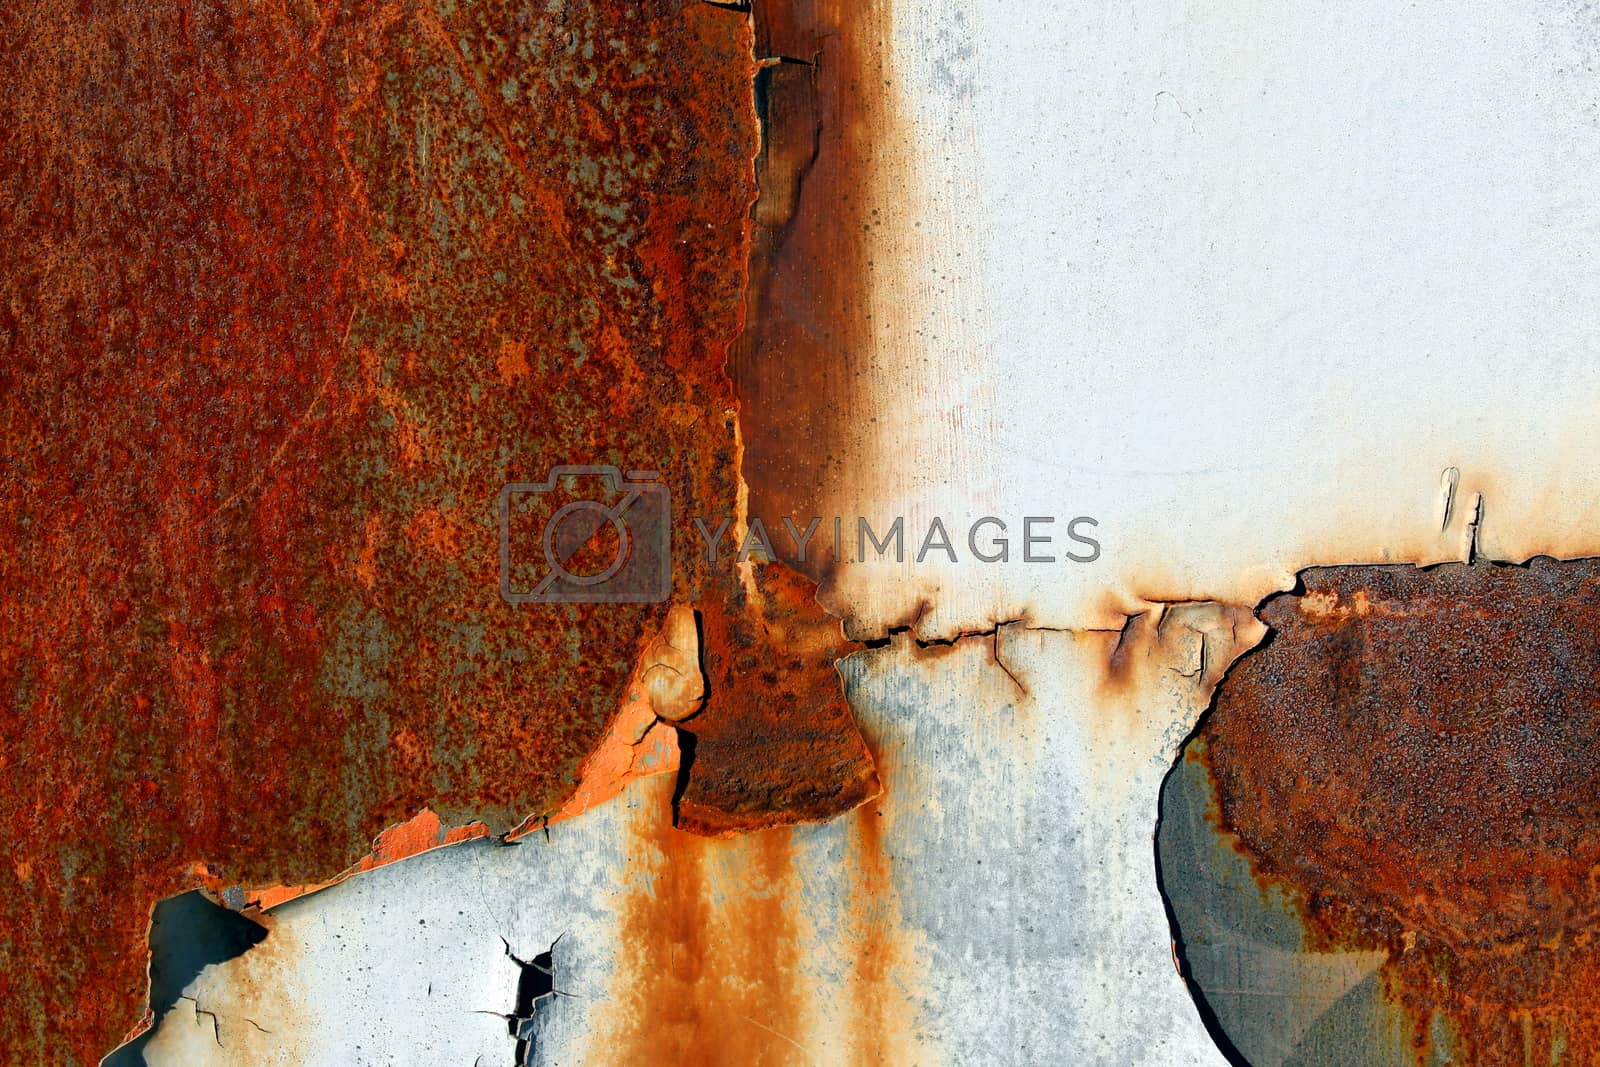 Royalty free image of Rust on metal surface by maciejmatteo